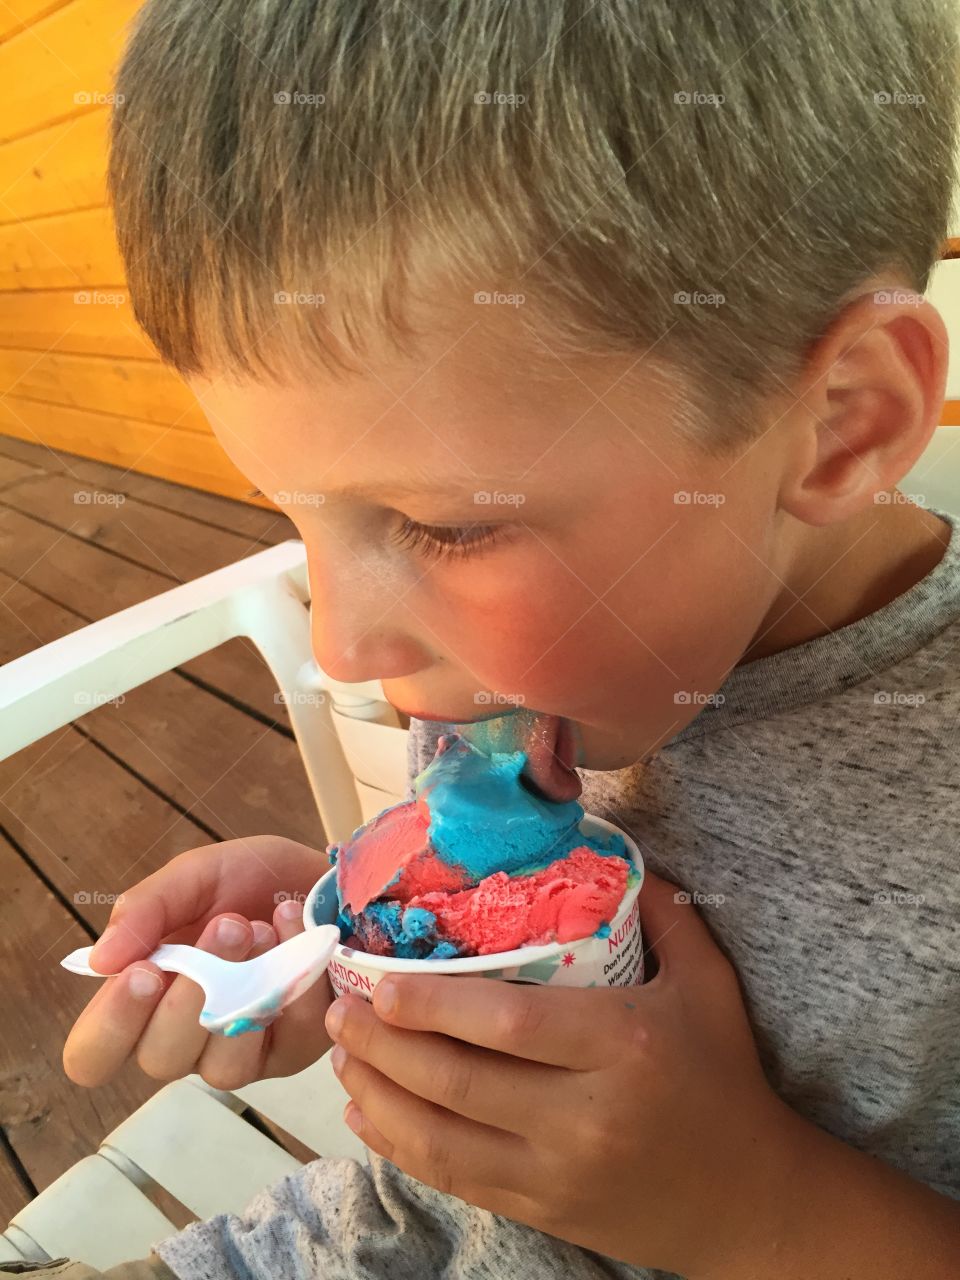 A young boy enjoys “Superman” flavored ice cream on a hot summer afternoon.